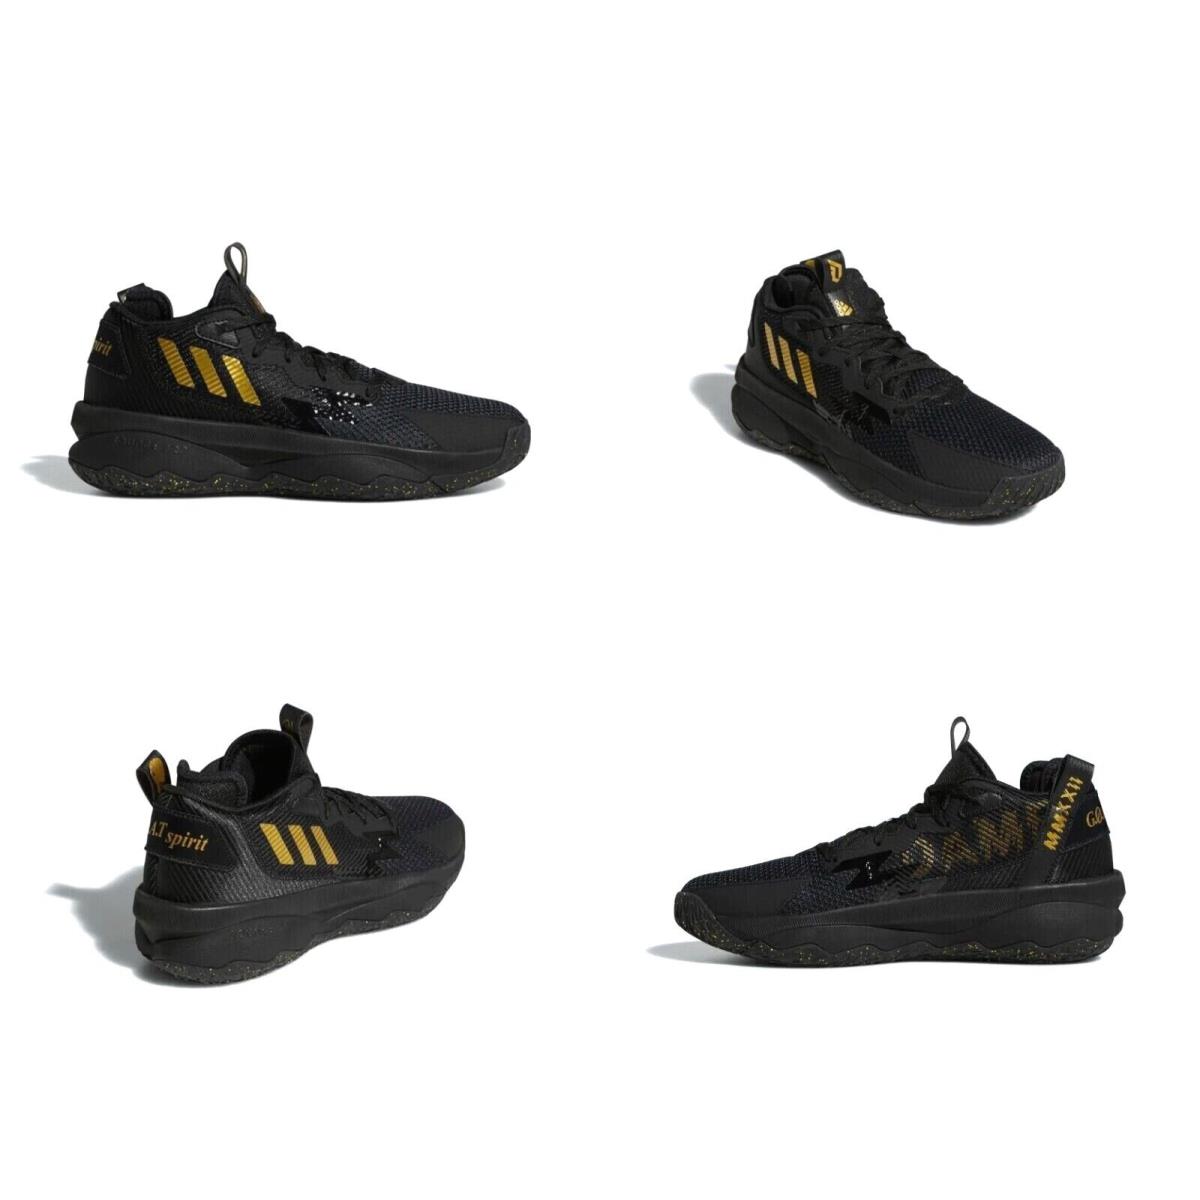 Adidas Dame 8 Black and Gold Unisex Basketball Shoes GY2774 10-12 Mens